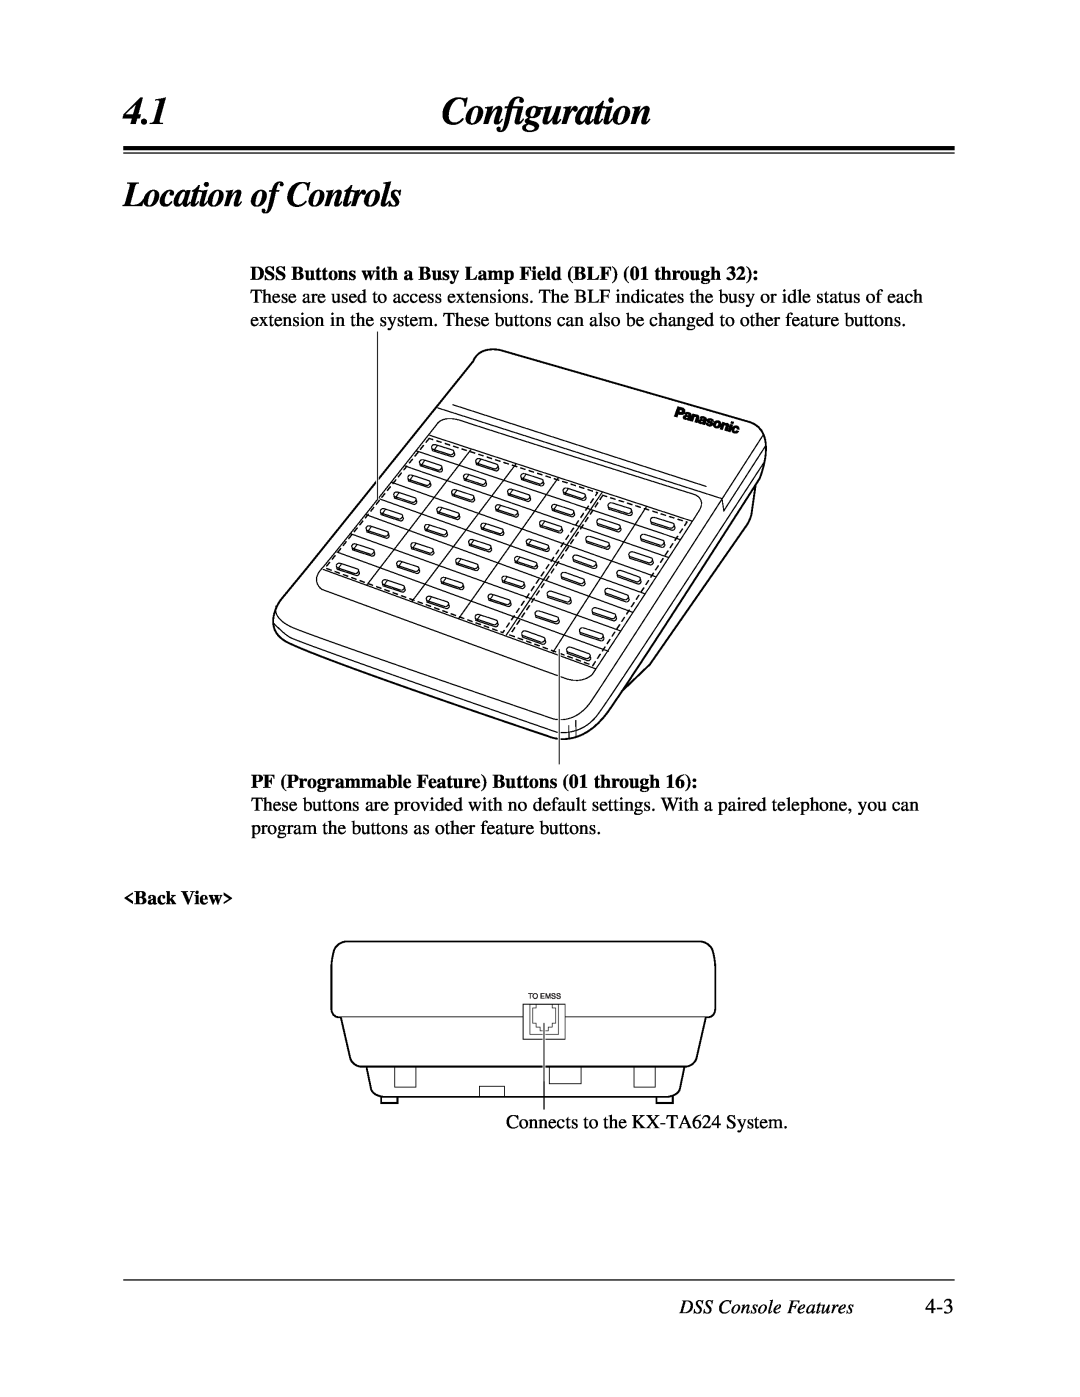 Panasonic KX-TA624 4.1Conﬁguration, Location of Controls, DSS Buttons with a Busy Lamp Field BLF 01 through, <Back View> 